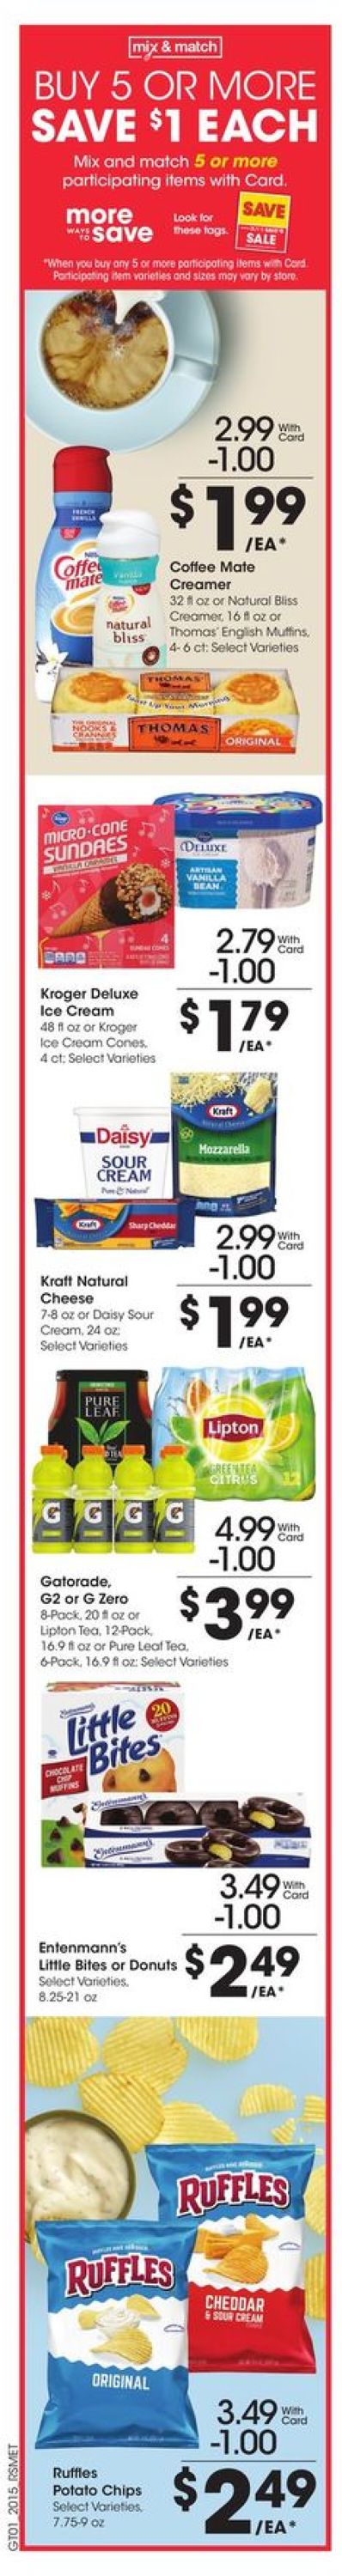 Catalogue Pick ‘n Save from 05/13/2020